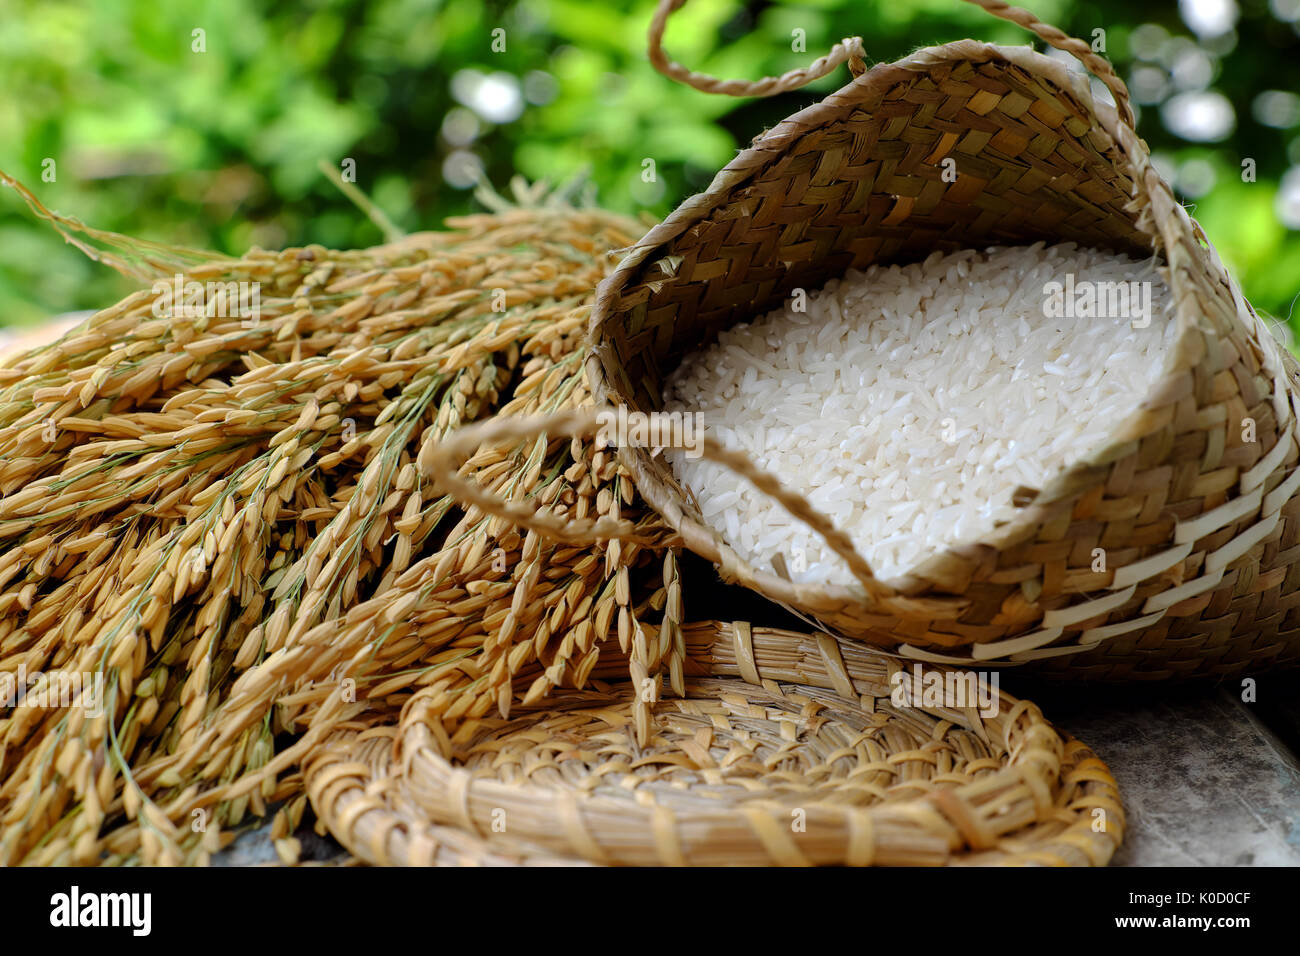 Close up of paddy grain and rice seed on green background, sheaf of rice in yellow and basket of grains Stock Photo